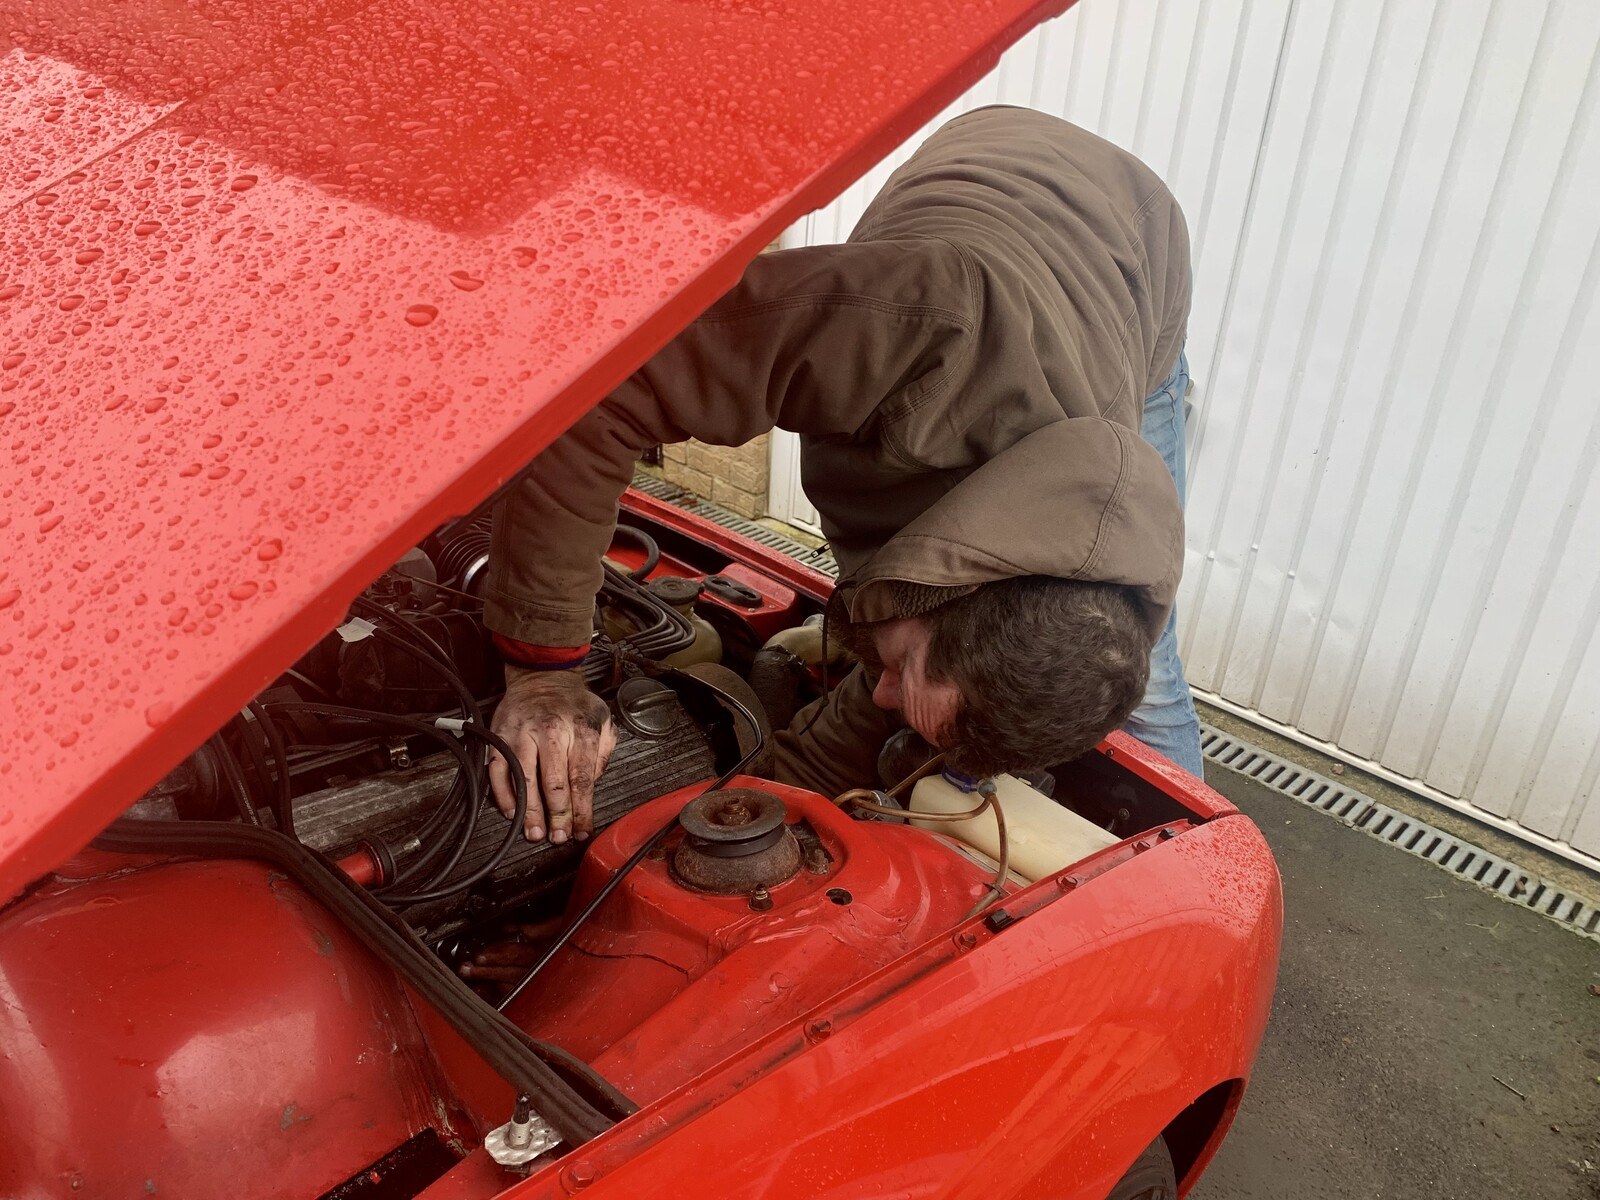 Me, bending over the engine bay of a red Porsche 924, with my hand reaching wayyy back underneath the engine for spark plug number 4